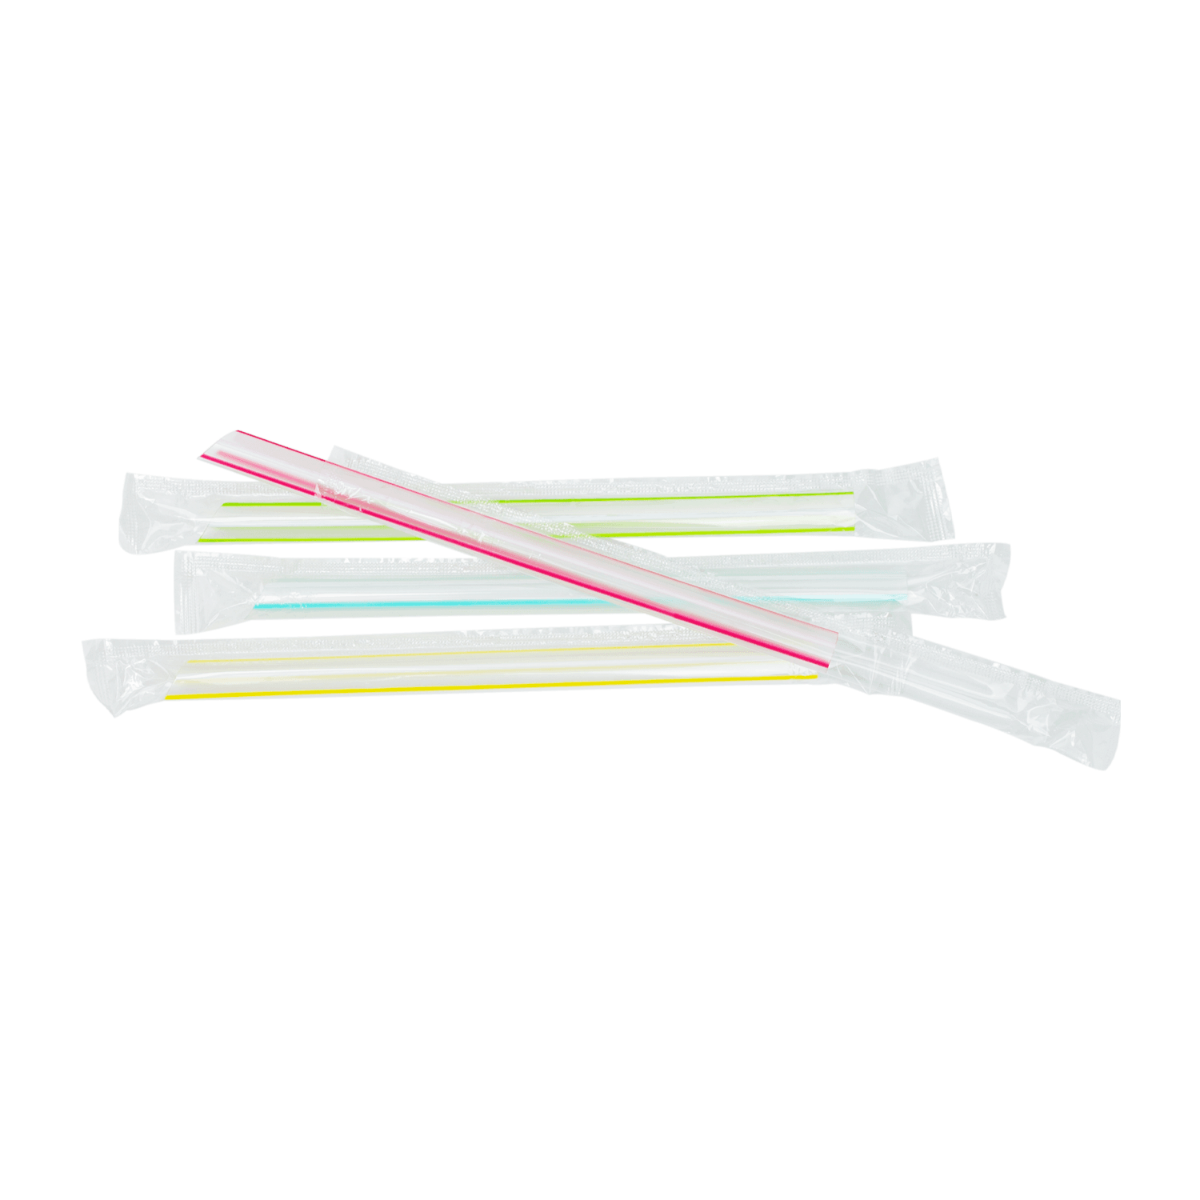 Karat 7.5'' Boba Straws (10mm) Poly Wrapped - Mixed Striped Colors - 2,000 ct, C9002s